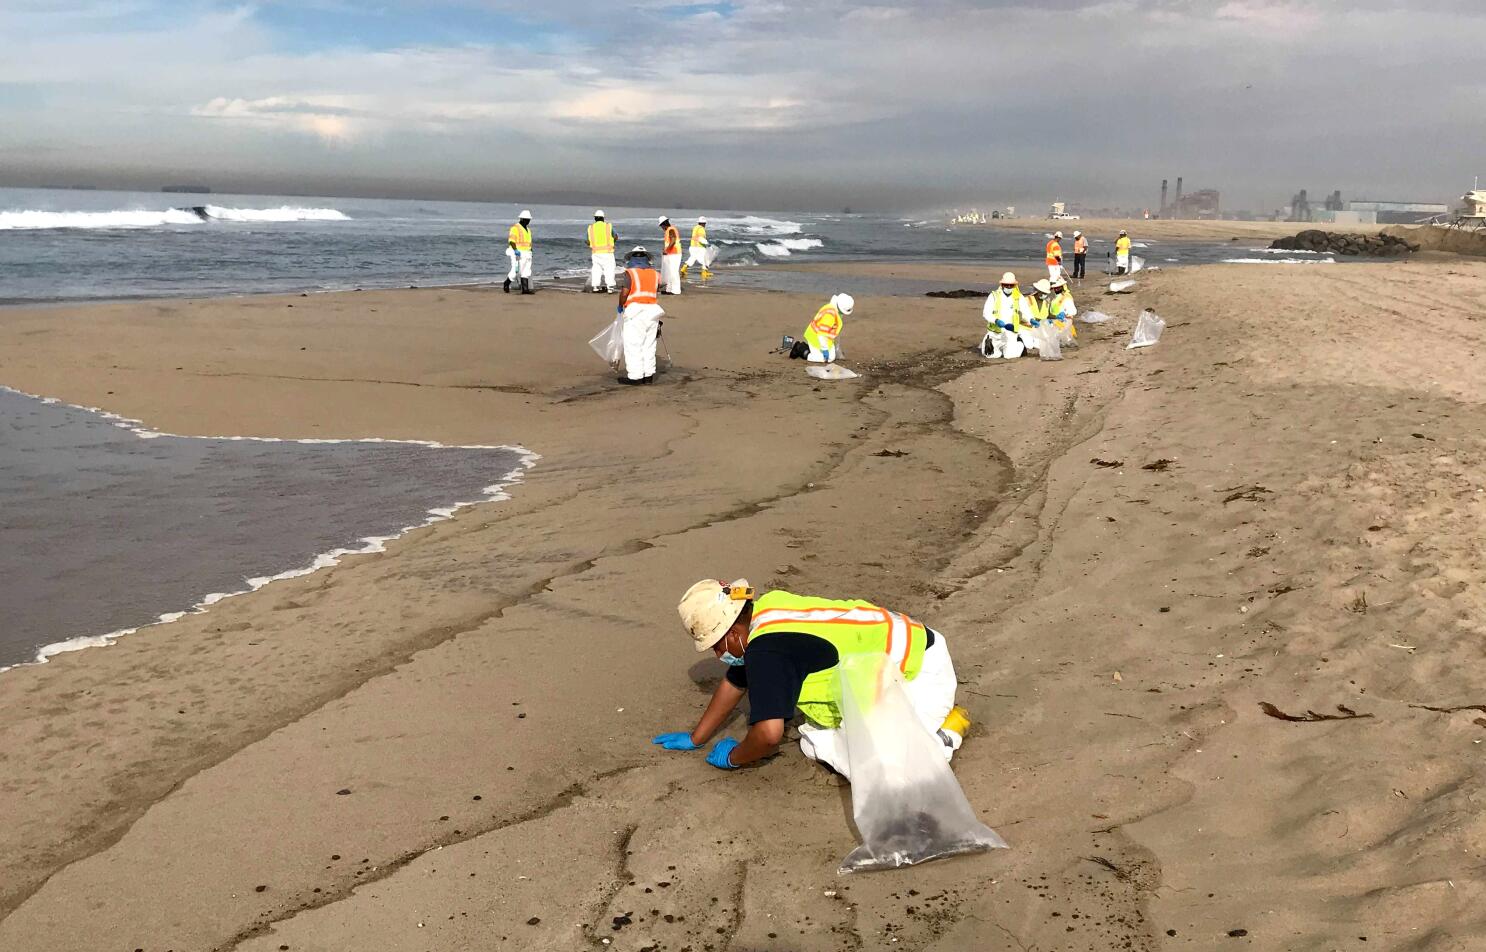 South OC Has A New(ish) Beach. Here's How They Saved The Sand